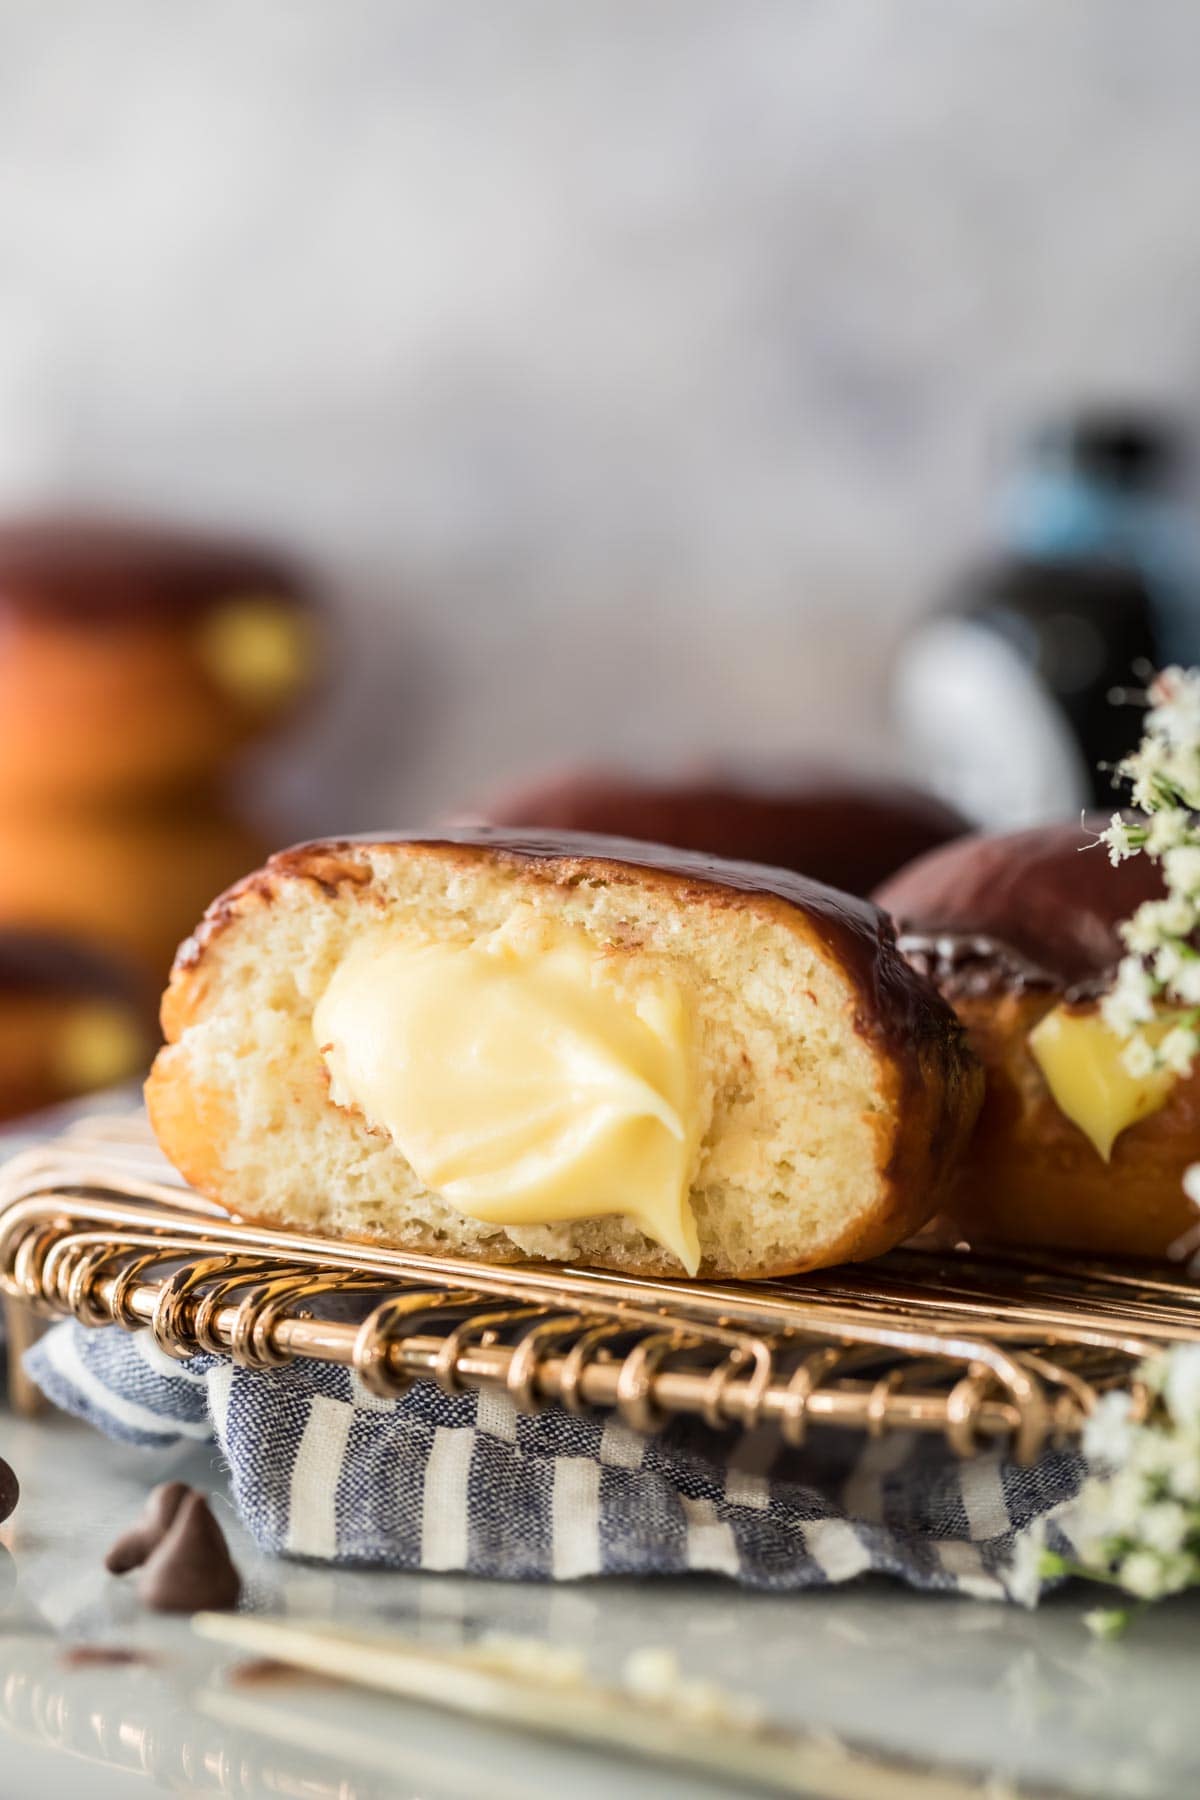 A ganache topped Boston cream donut that's been cut in half to show the pastry cream filling